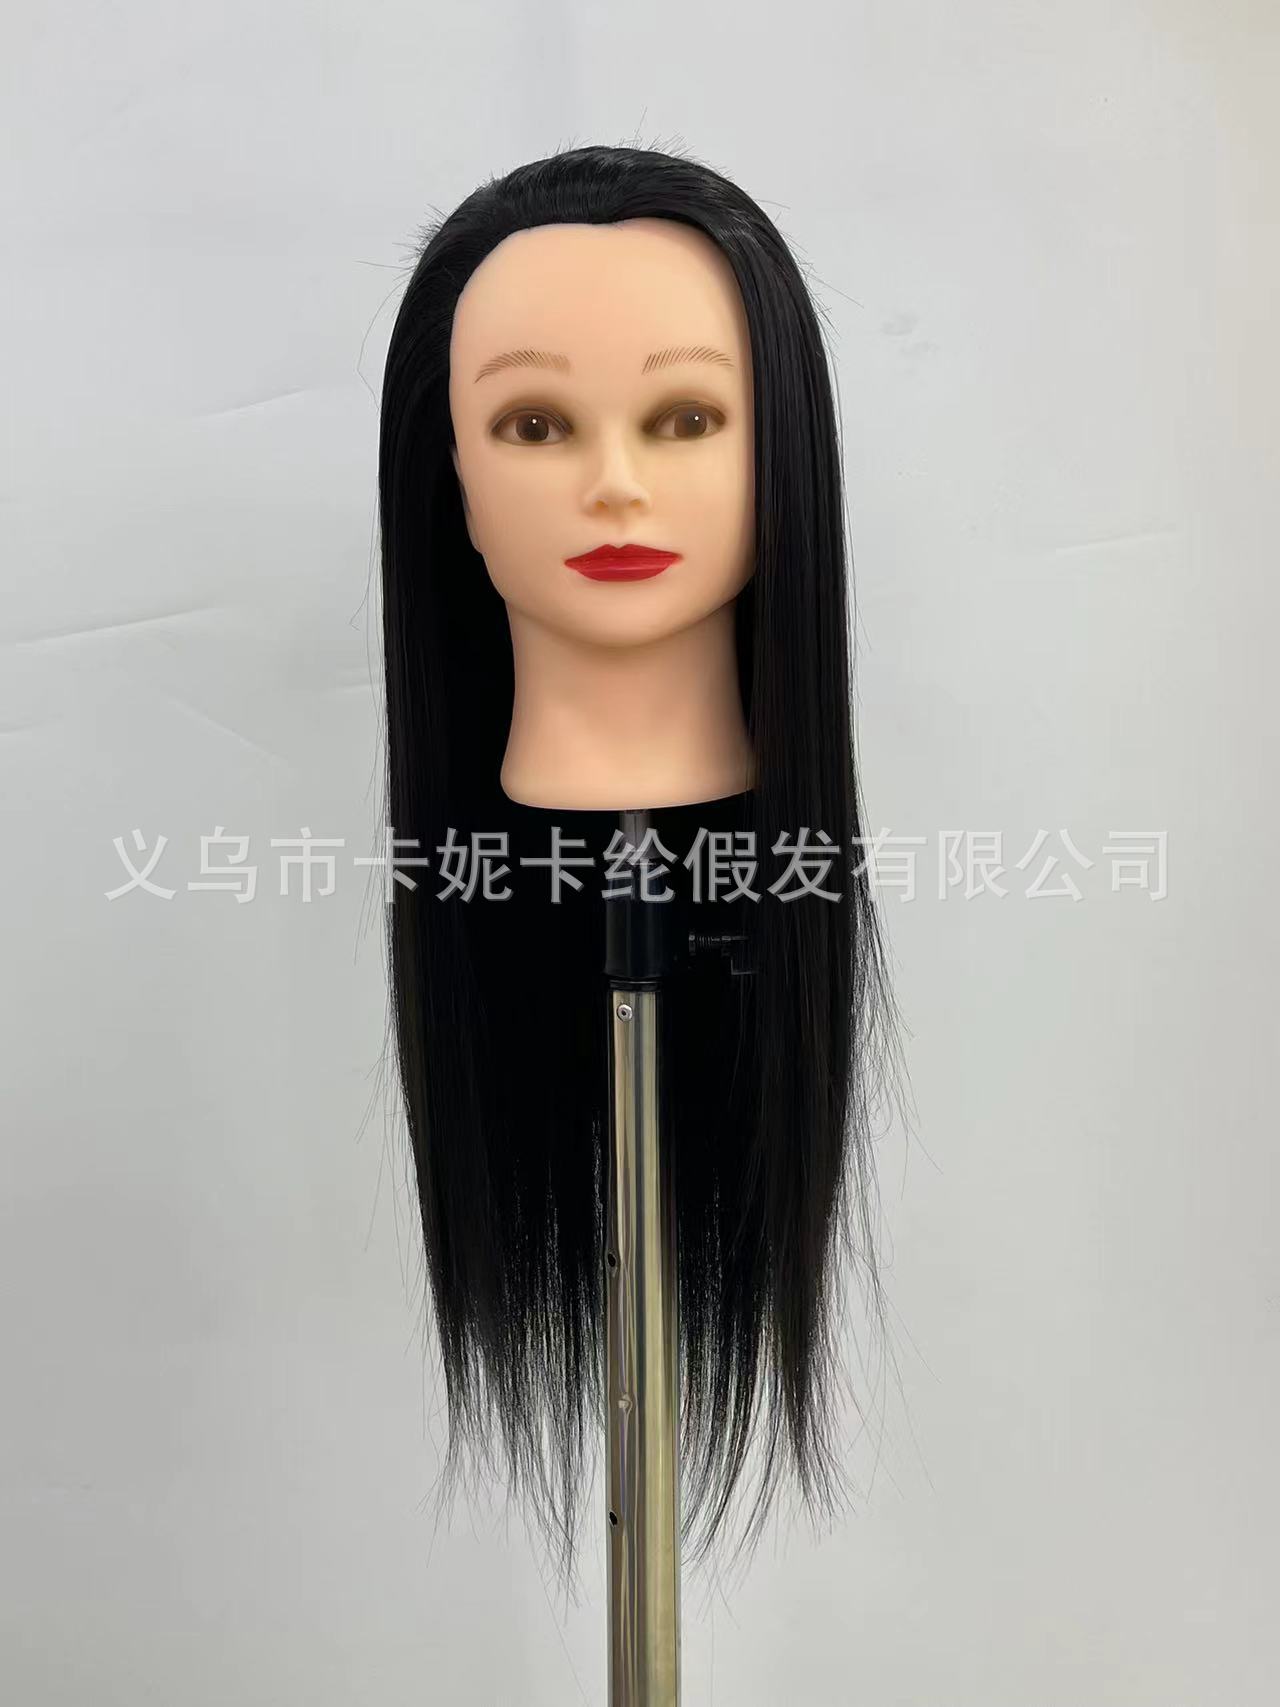 Newlook Hairdressing Mannequin Head Wig Can Practice Hair Cutting and Weaving Updo Coiled Hair Makeup Modeling Model Head Manufacturer